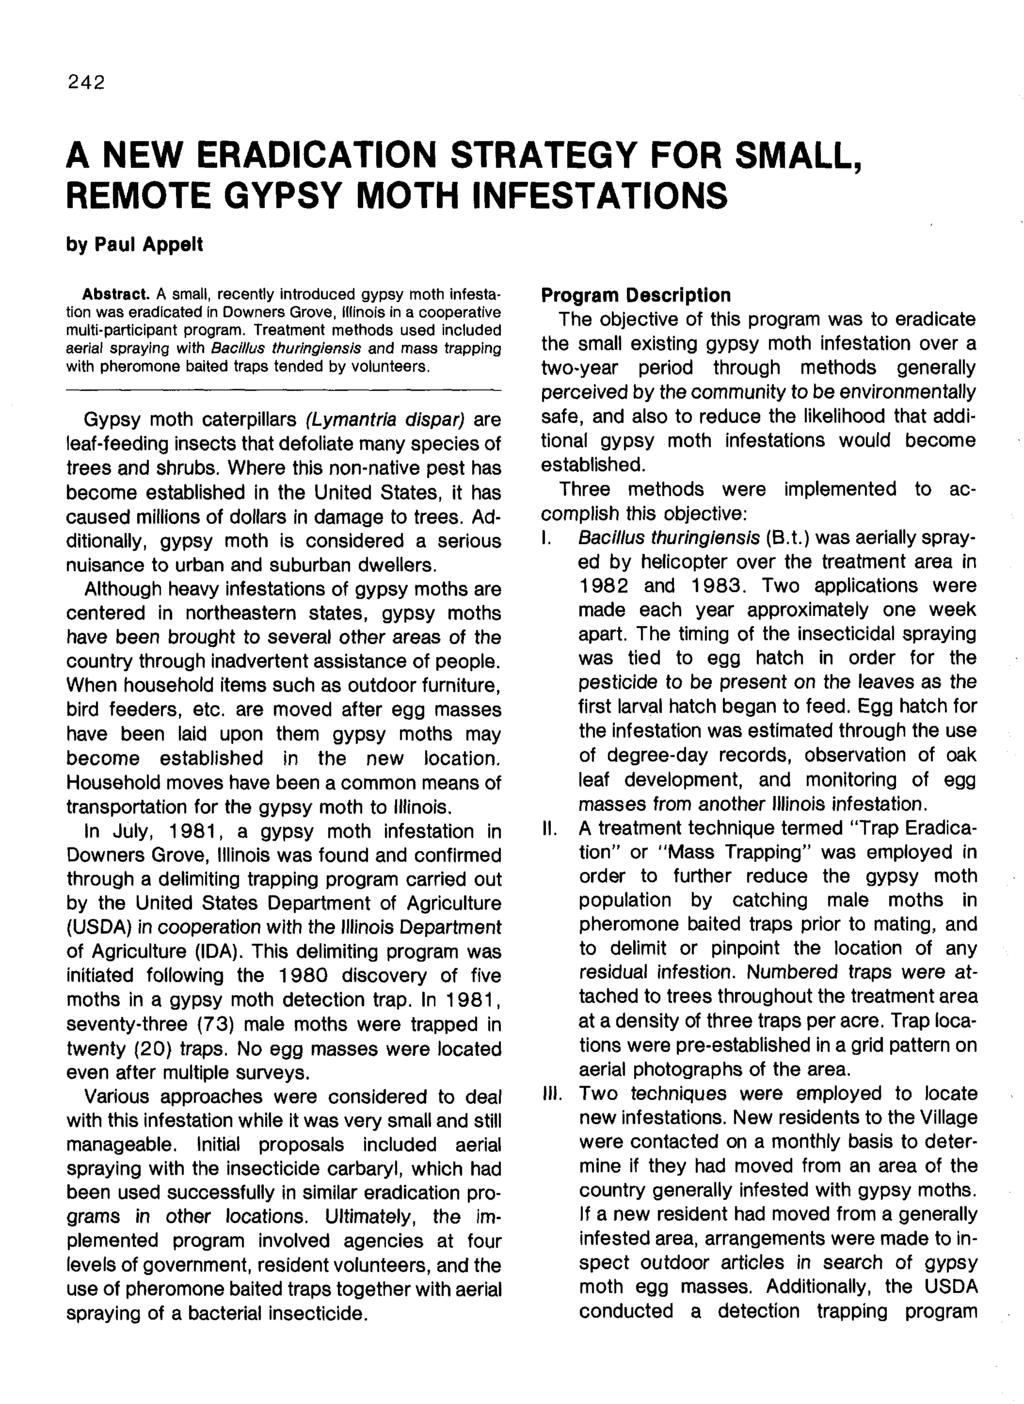 4 A NEW ERADICATION STRATEGY FOR SMALL, REMOTE GYPSY MOTH INFESTATIONS by Paul Appelt Abstract.